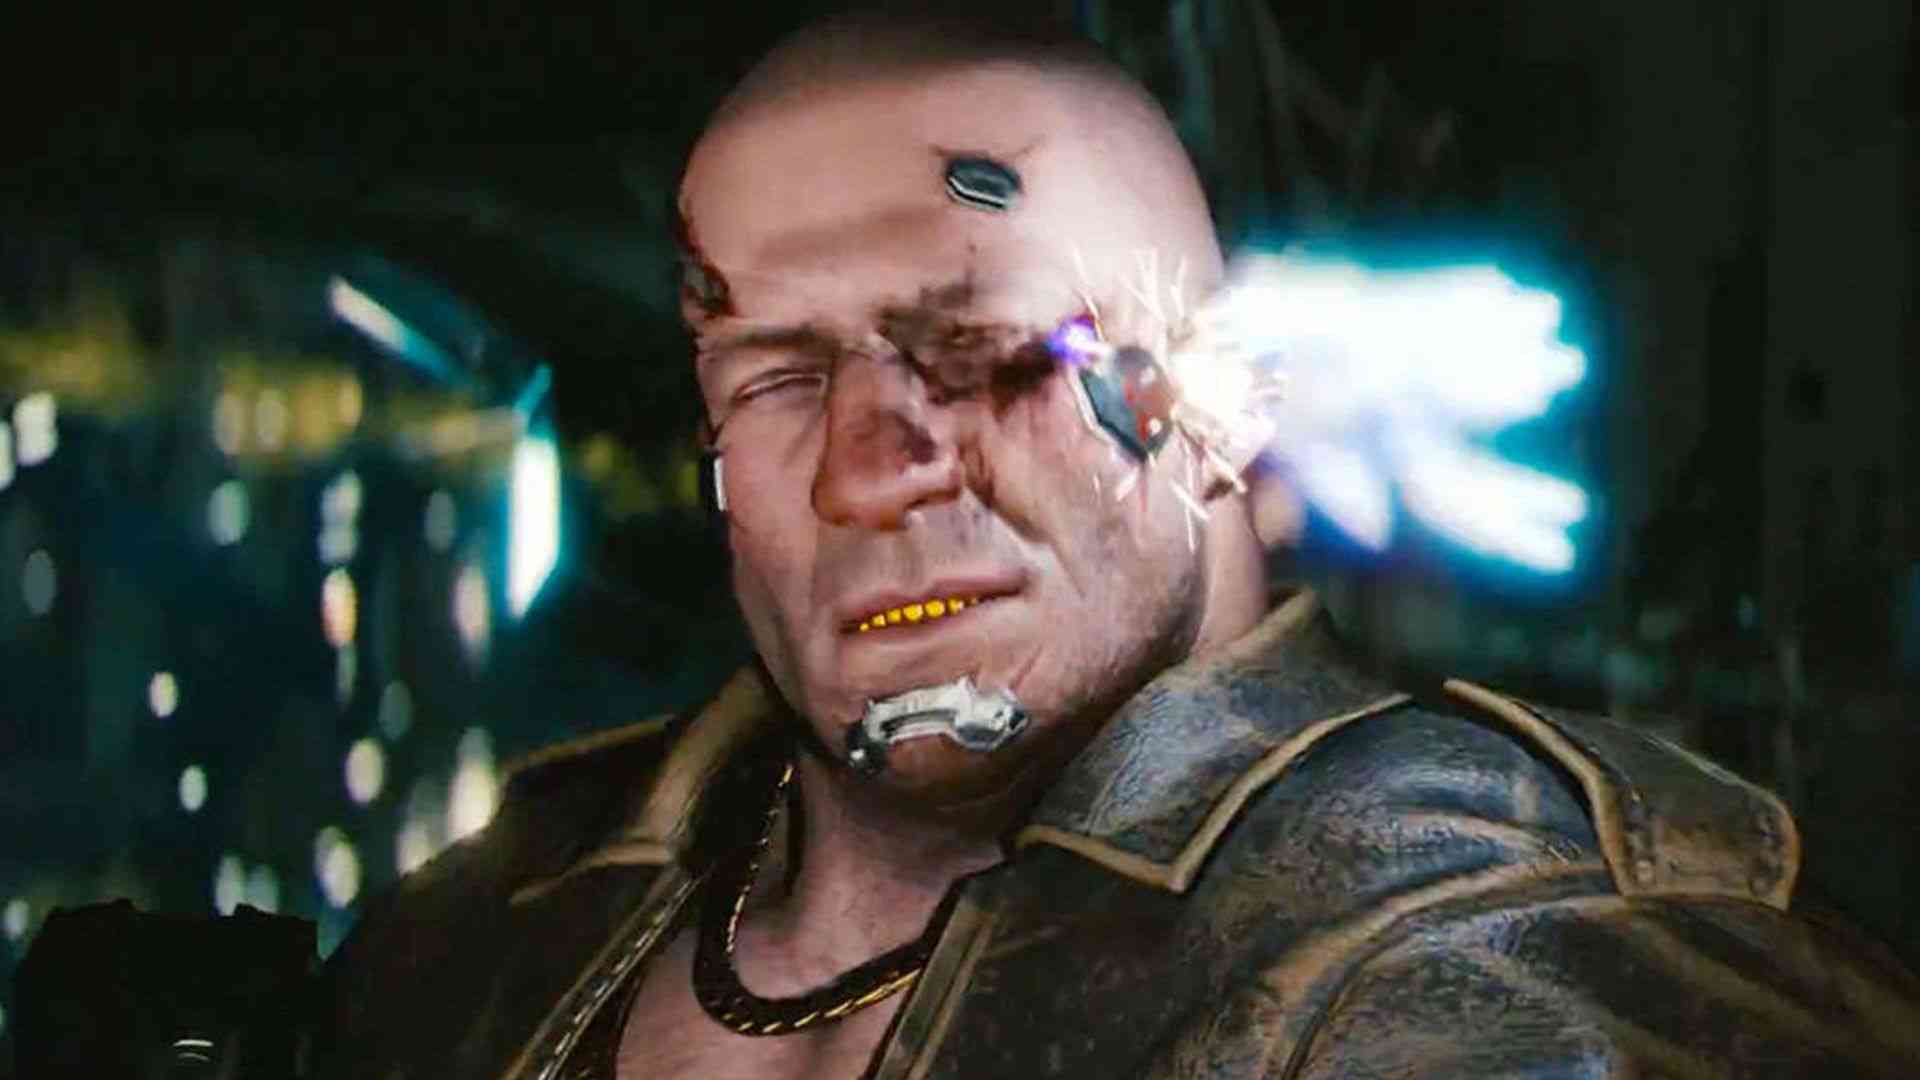 cyberpunk 2077 is coming to egx and mcm comic con london 3117 big 1